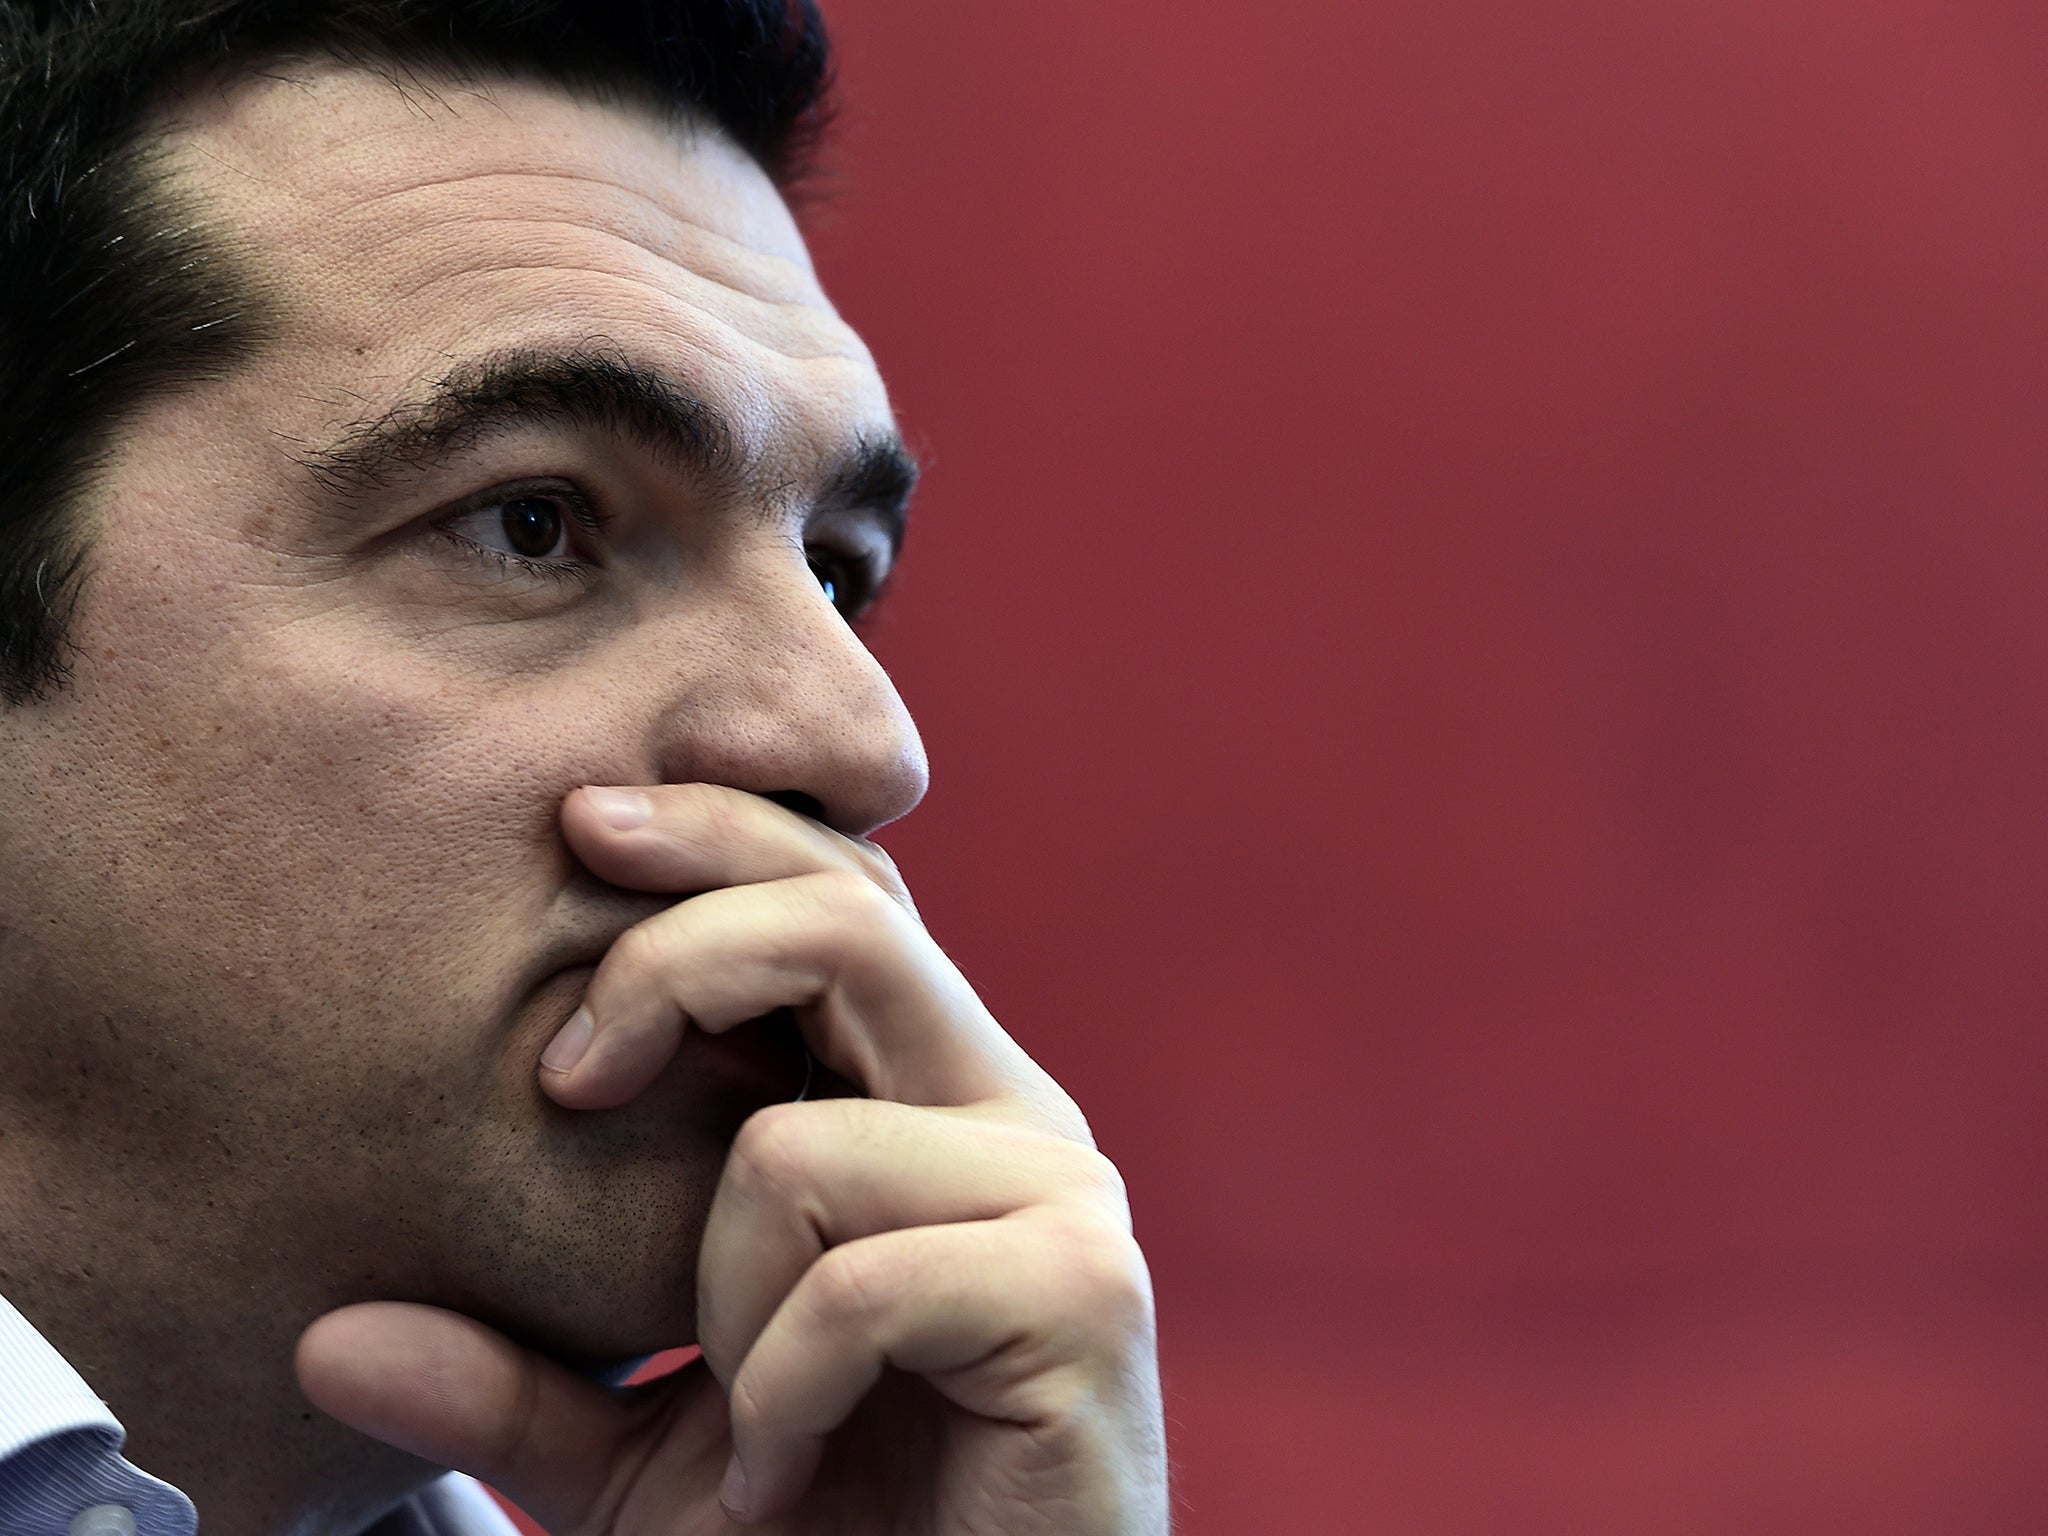 As Syriza’s leader, Alexis Tsipras won just 3.3 per cent of the vote in the 2004 elections. The party now dominates Greek politics.